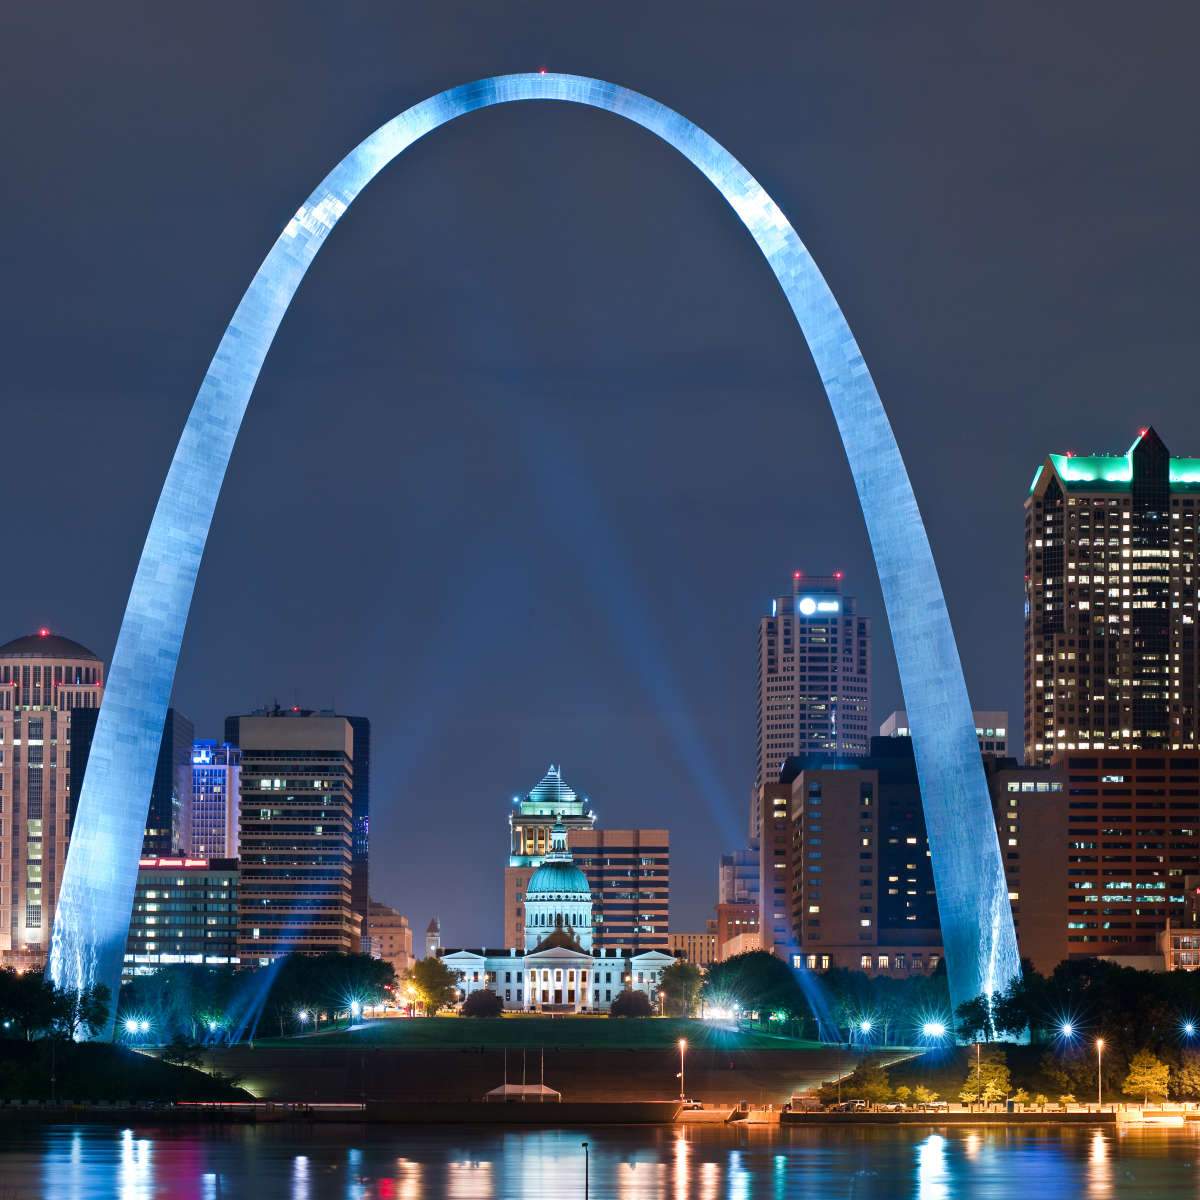 Saint Louis Gateway Arch Missouri City Night View Poster Canvas Print  Painting Picture Wall Art Home Hallway Bedroom Living Room Decor  (unframe,12x24